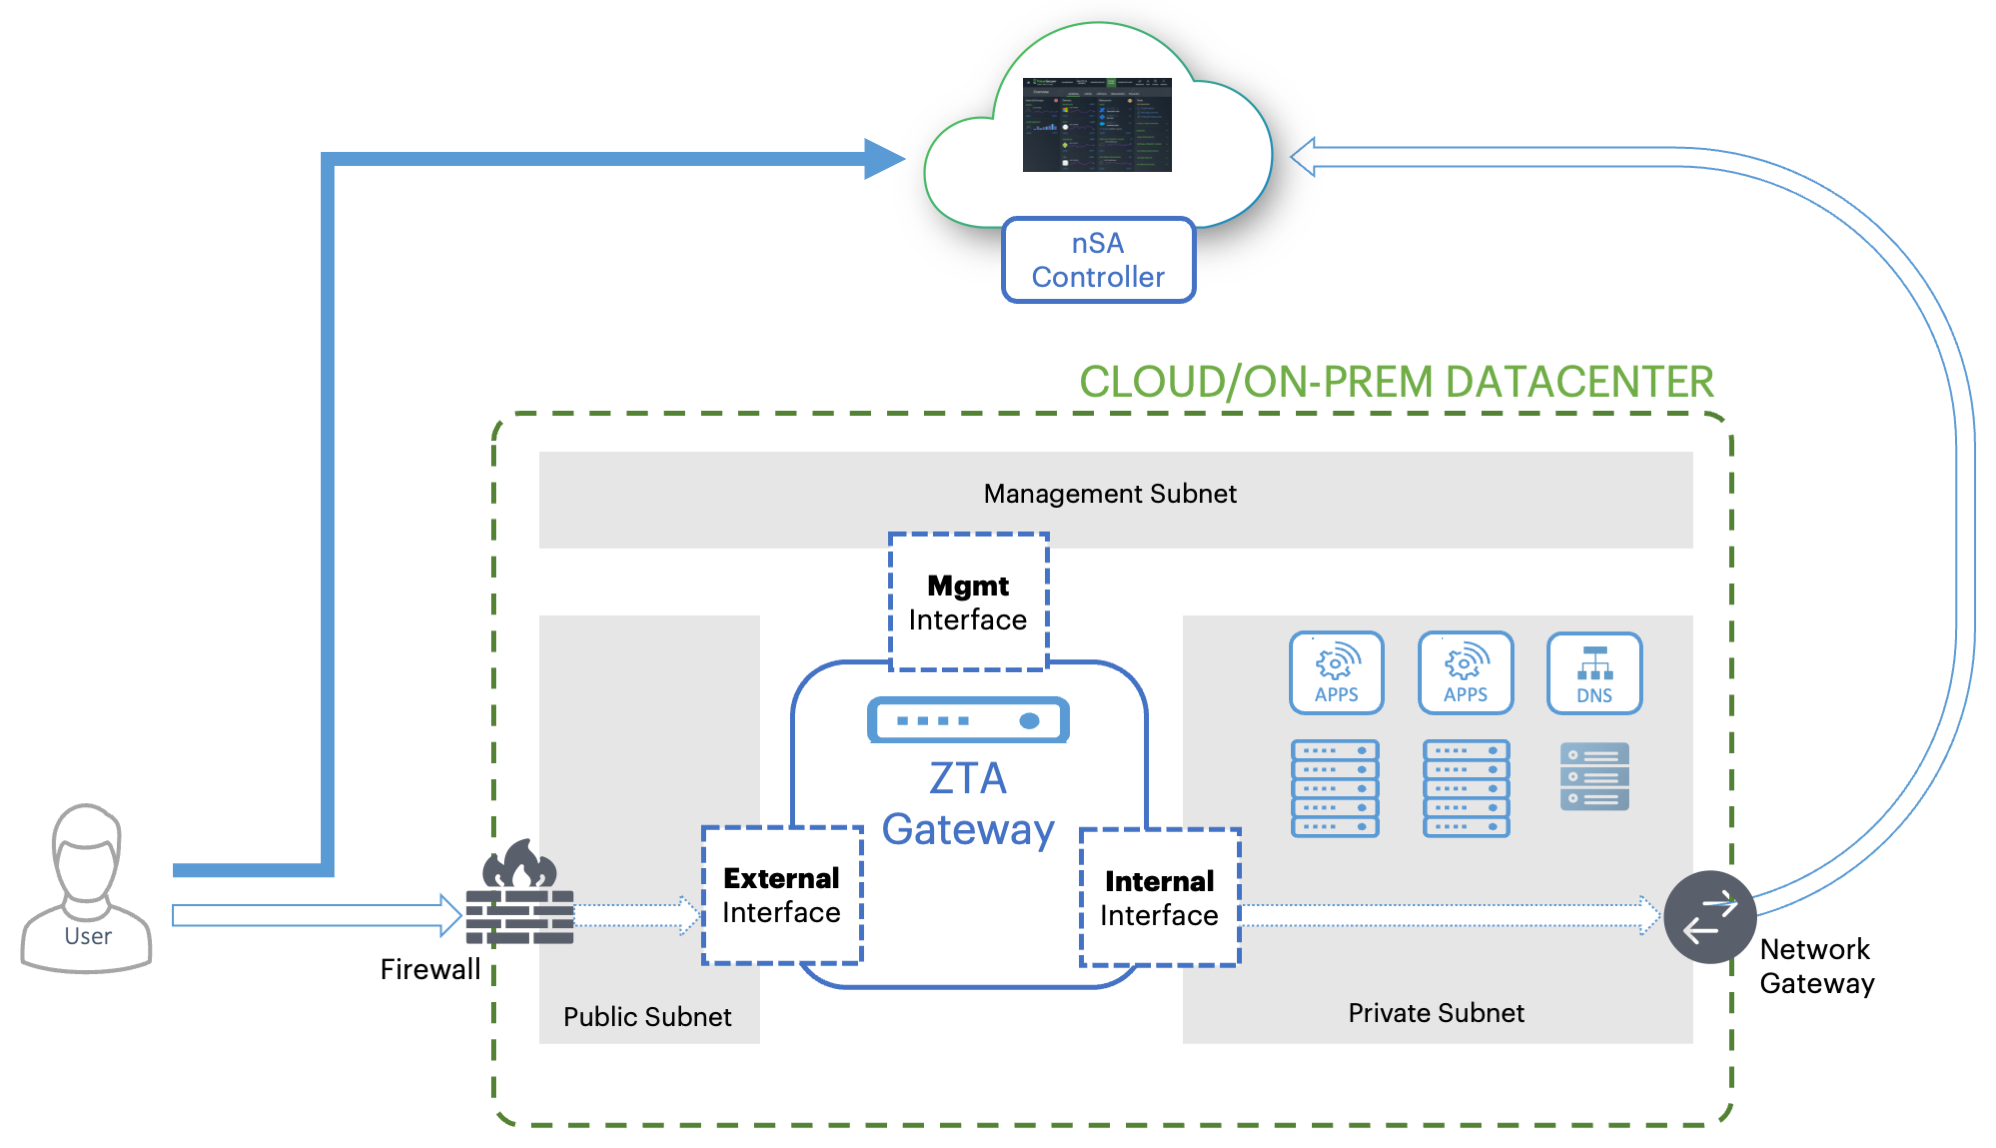 Gateway network connections in your cloud and on-prem datacenter